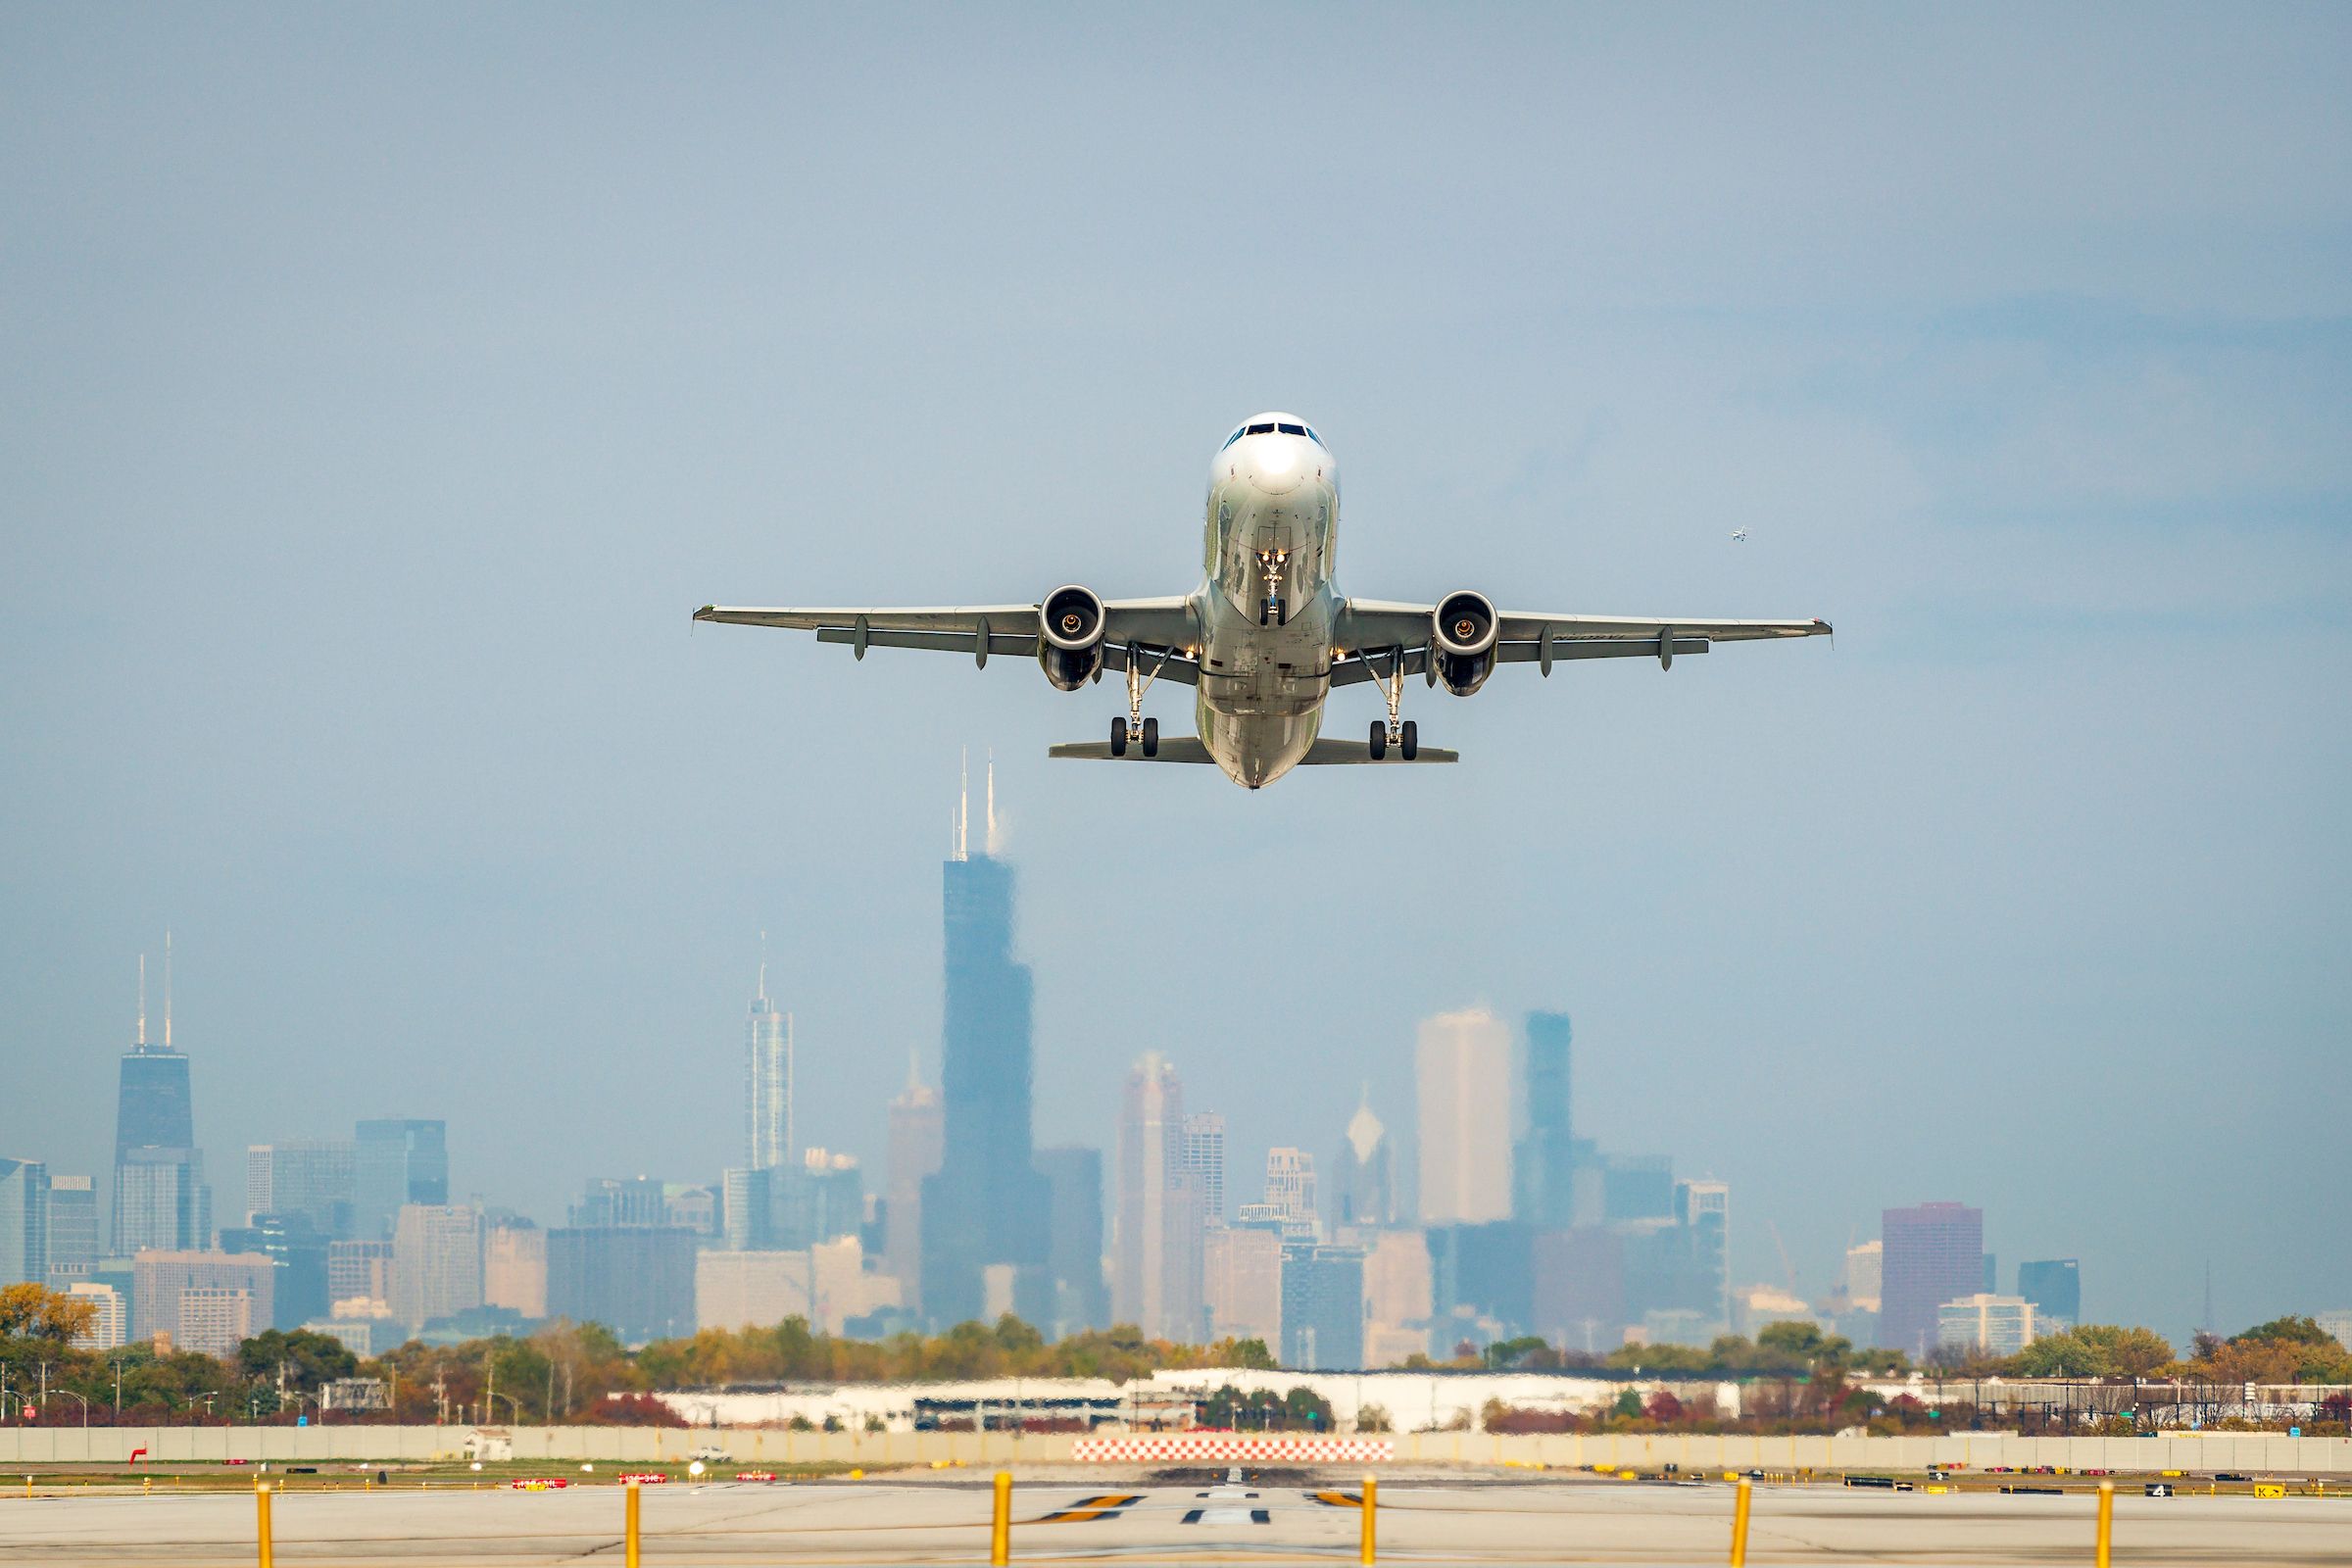 A takeoff with the Chicago skyline in the background.